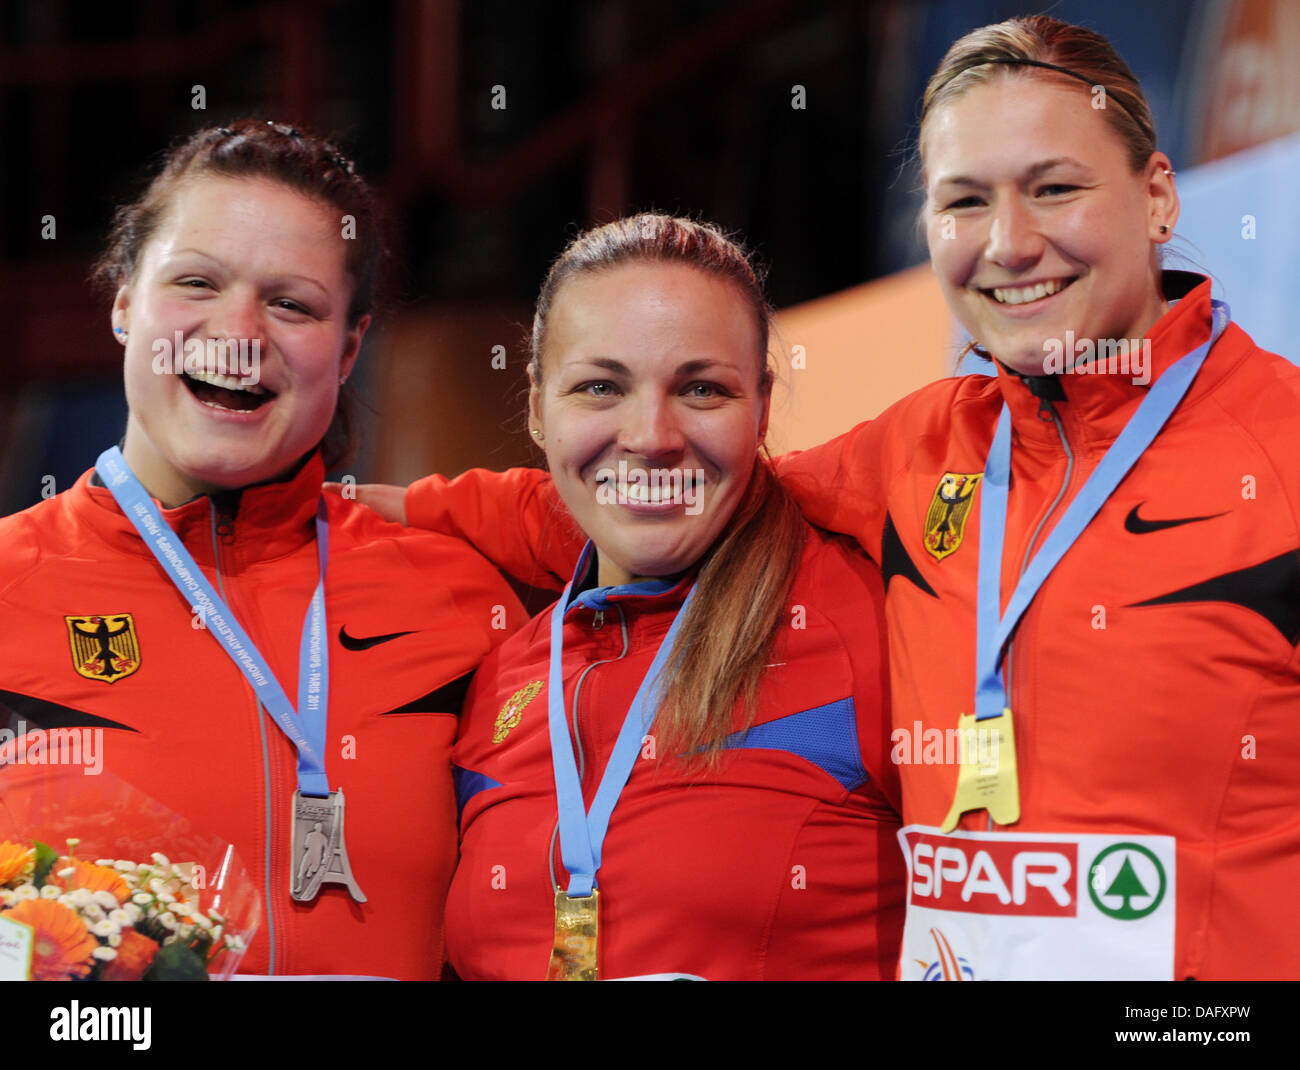 (L to R:) Germany's Christina Schwanitz (silver), Russia's Anna Avdeyeva (gold) and Germany's Josephine Terlecki (bronze) pose for a picture with their medals after the women's hot put competition of the NAIA Indoor Track & Field Championship at Palais Omnisports in Paris, France, 05 March 2011. Photo: Arne Dedert Stock Photo